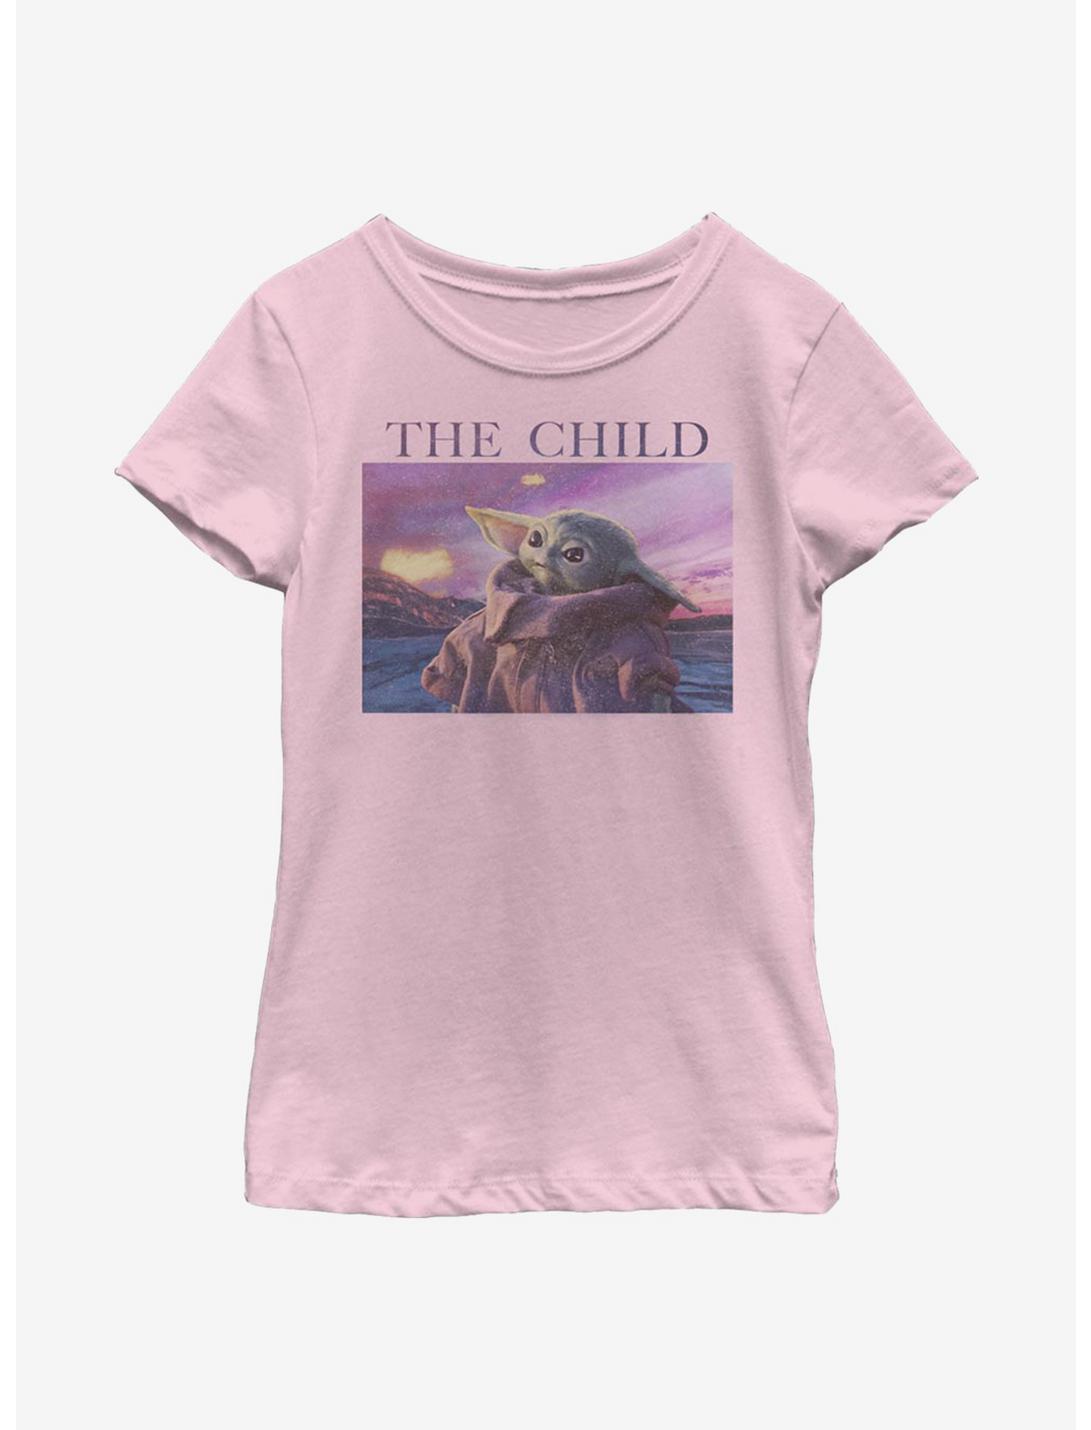 Star Wars The Mandalorian The Child Pink Sky Youth Girls T-Shirt, PINK, hi-res